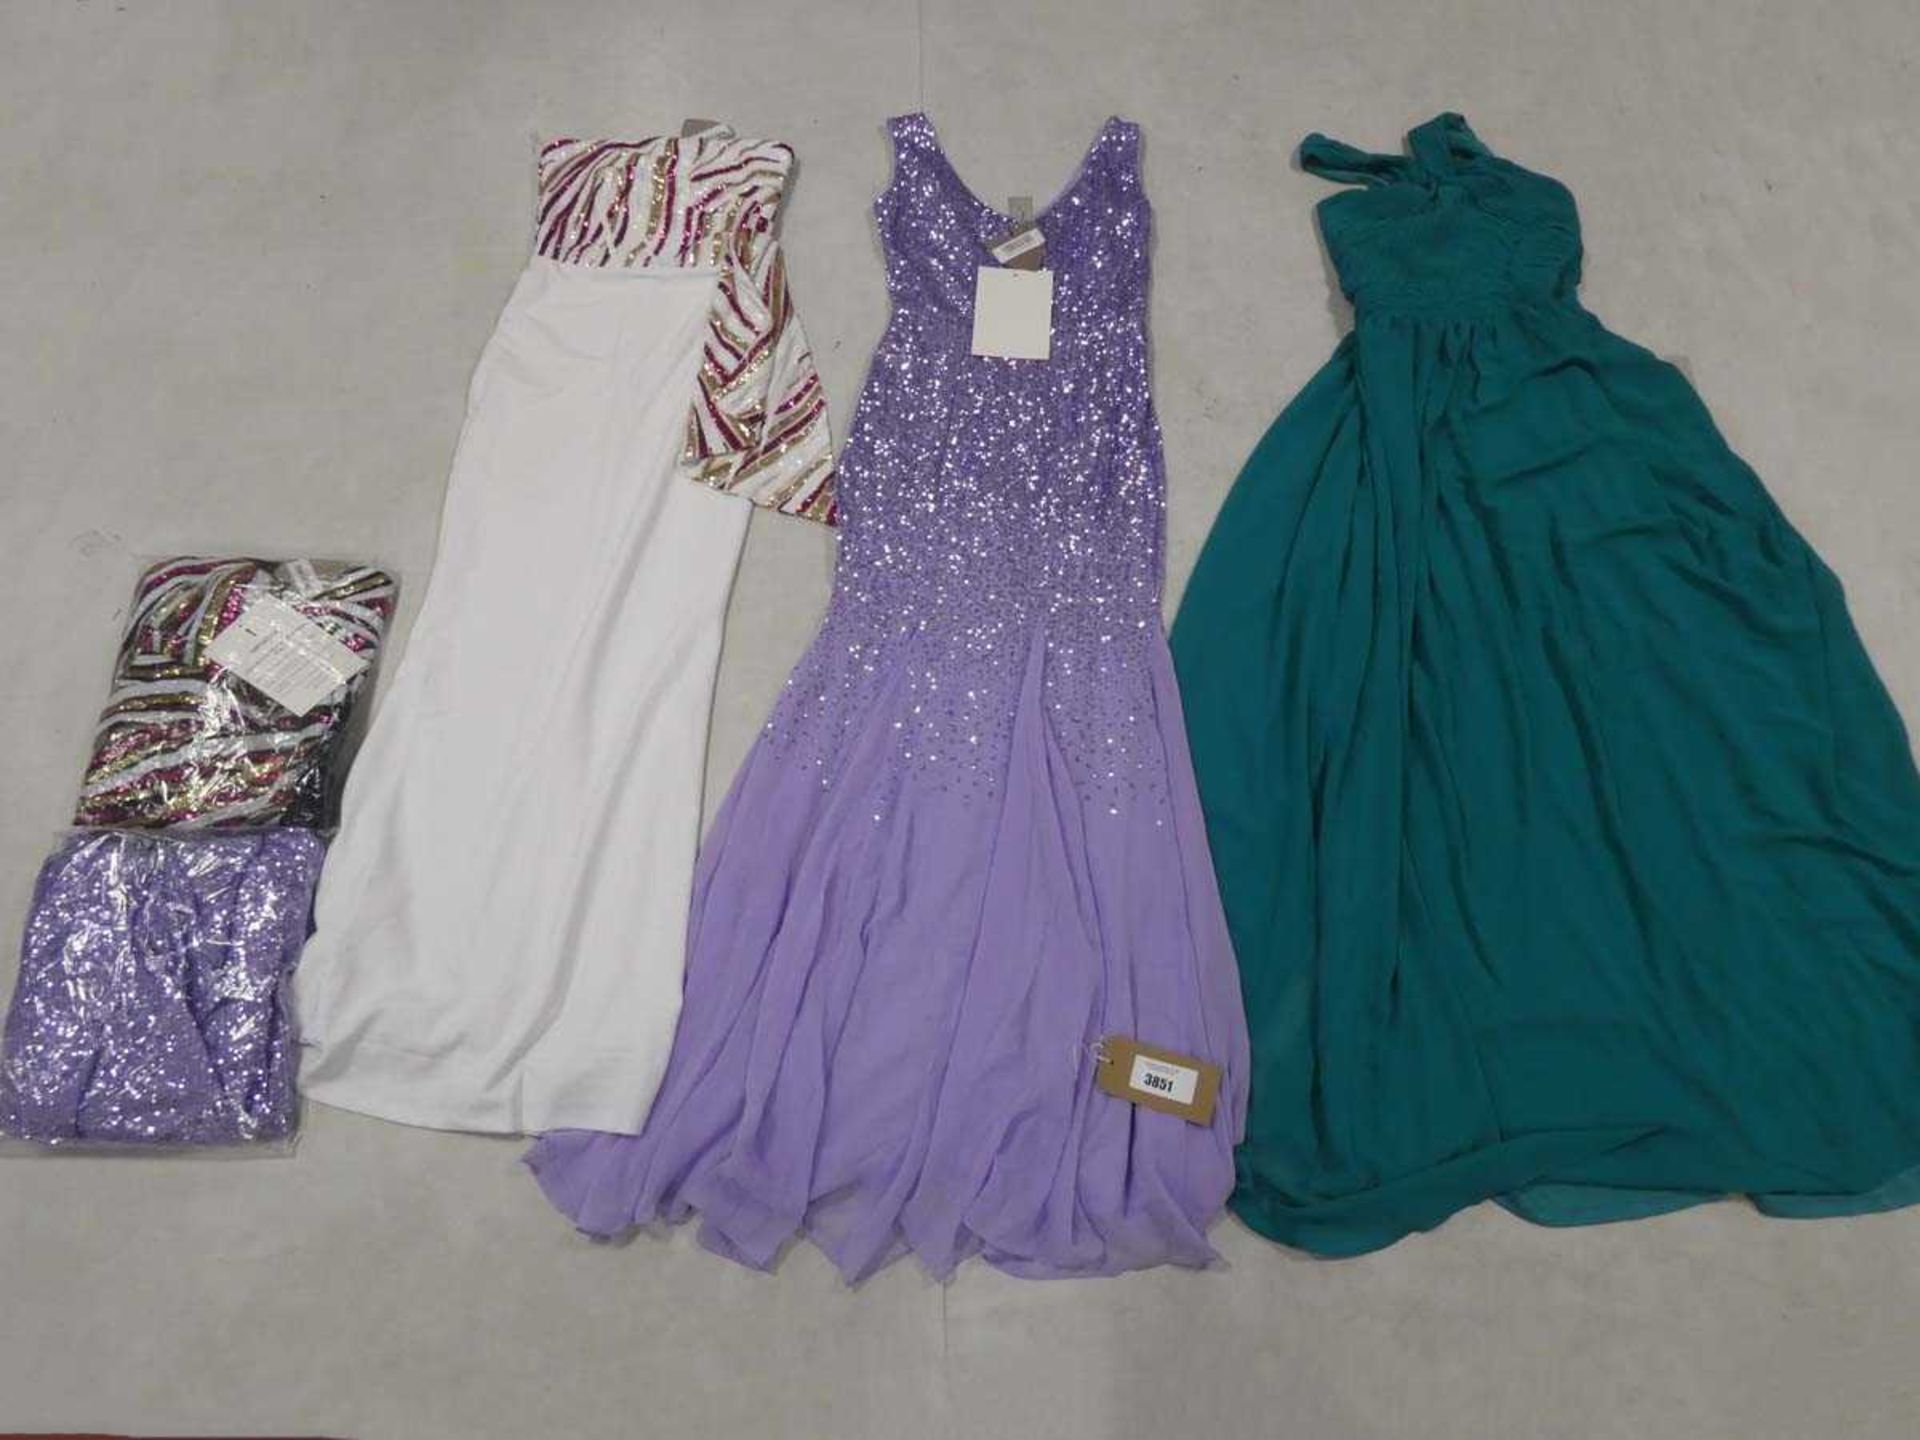 +VAT Selection of Godiva London dresses in various styles and sizes